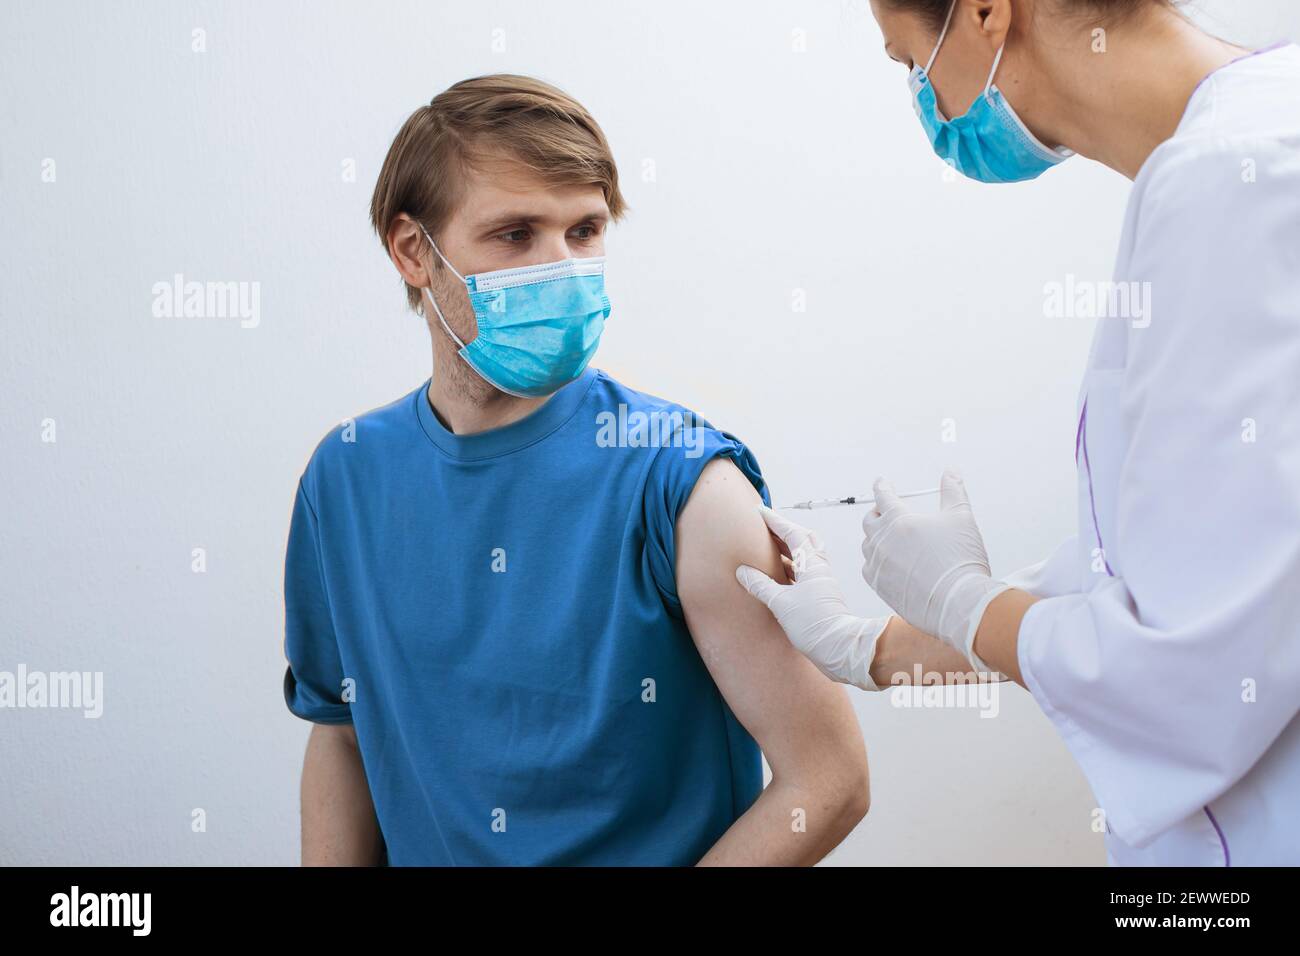 Male getting Covid-19 vaccine. Close up doctor making injection to patient in medical mask. Syringe of coronavirus vaccine. Man receives jab vaccinate Stock Photo